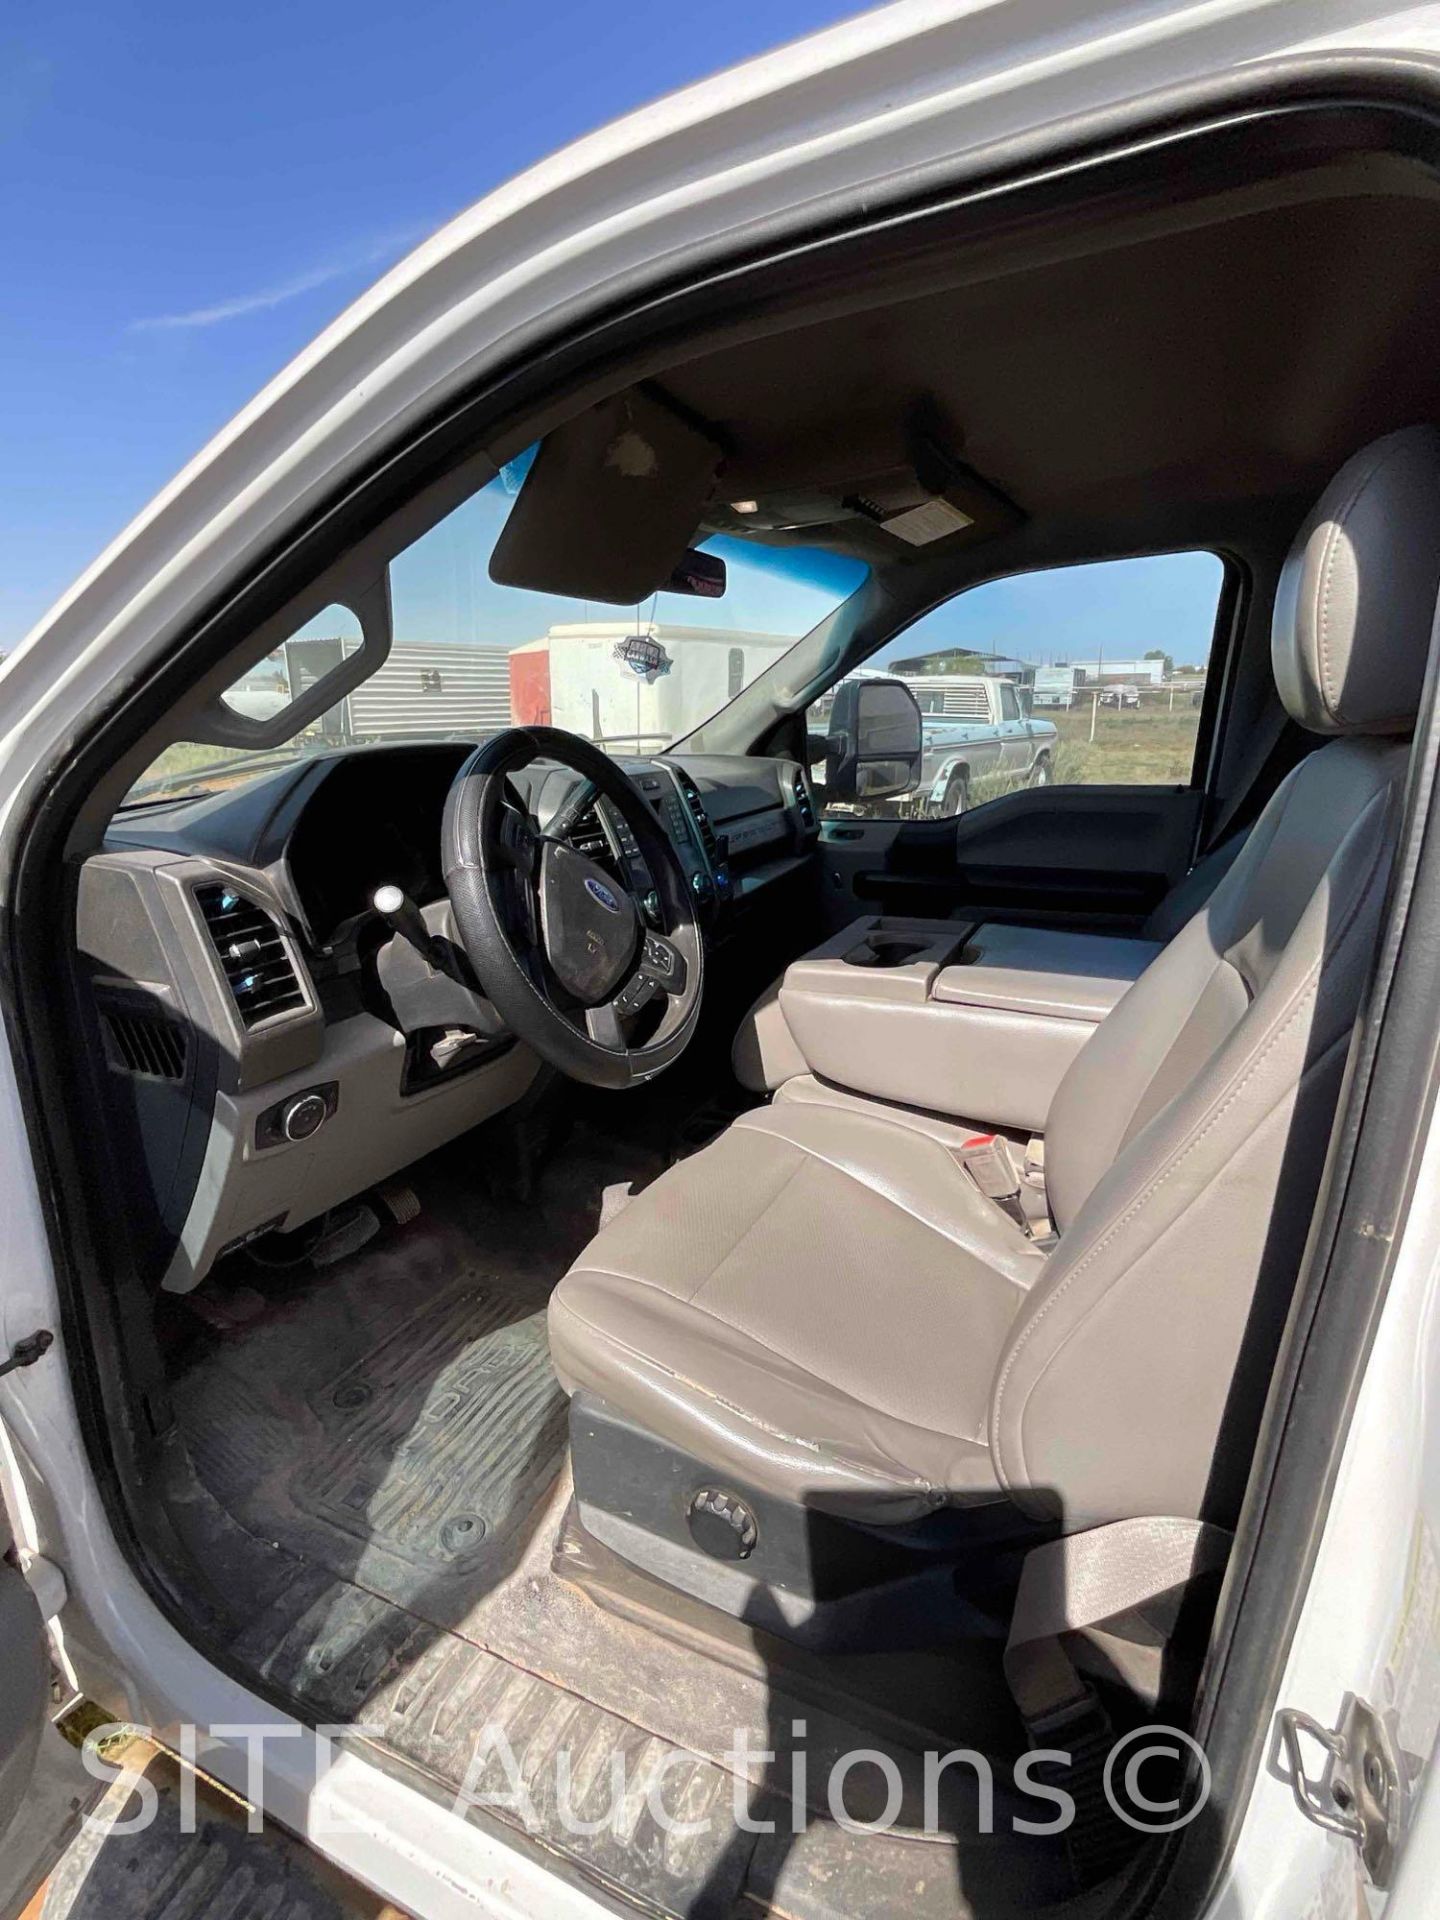 2018 Ford F250 SD Crew Cab Pickup Truck - Image 16 of 20